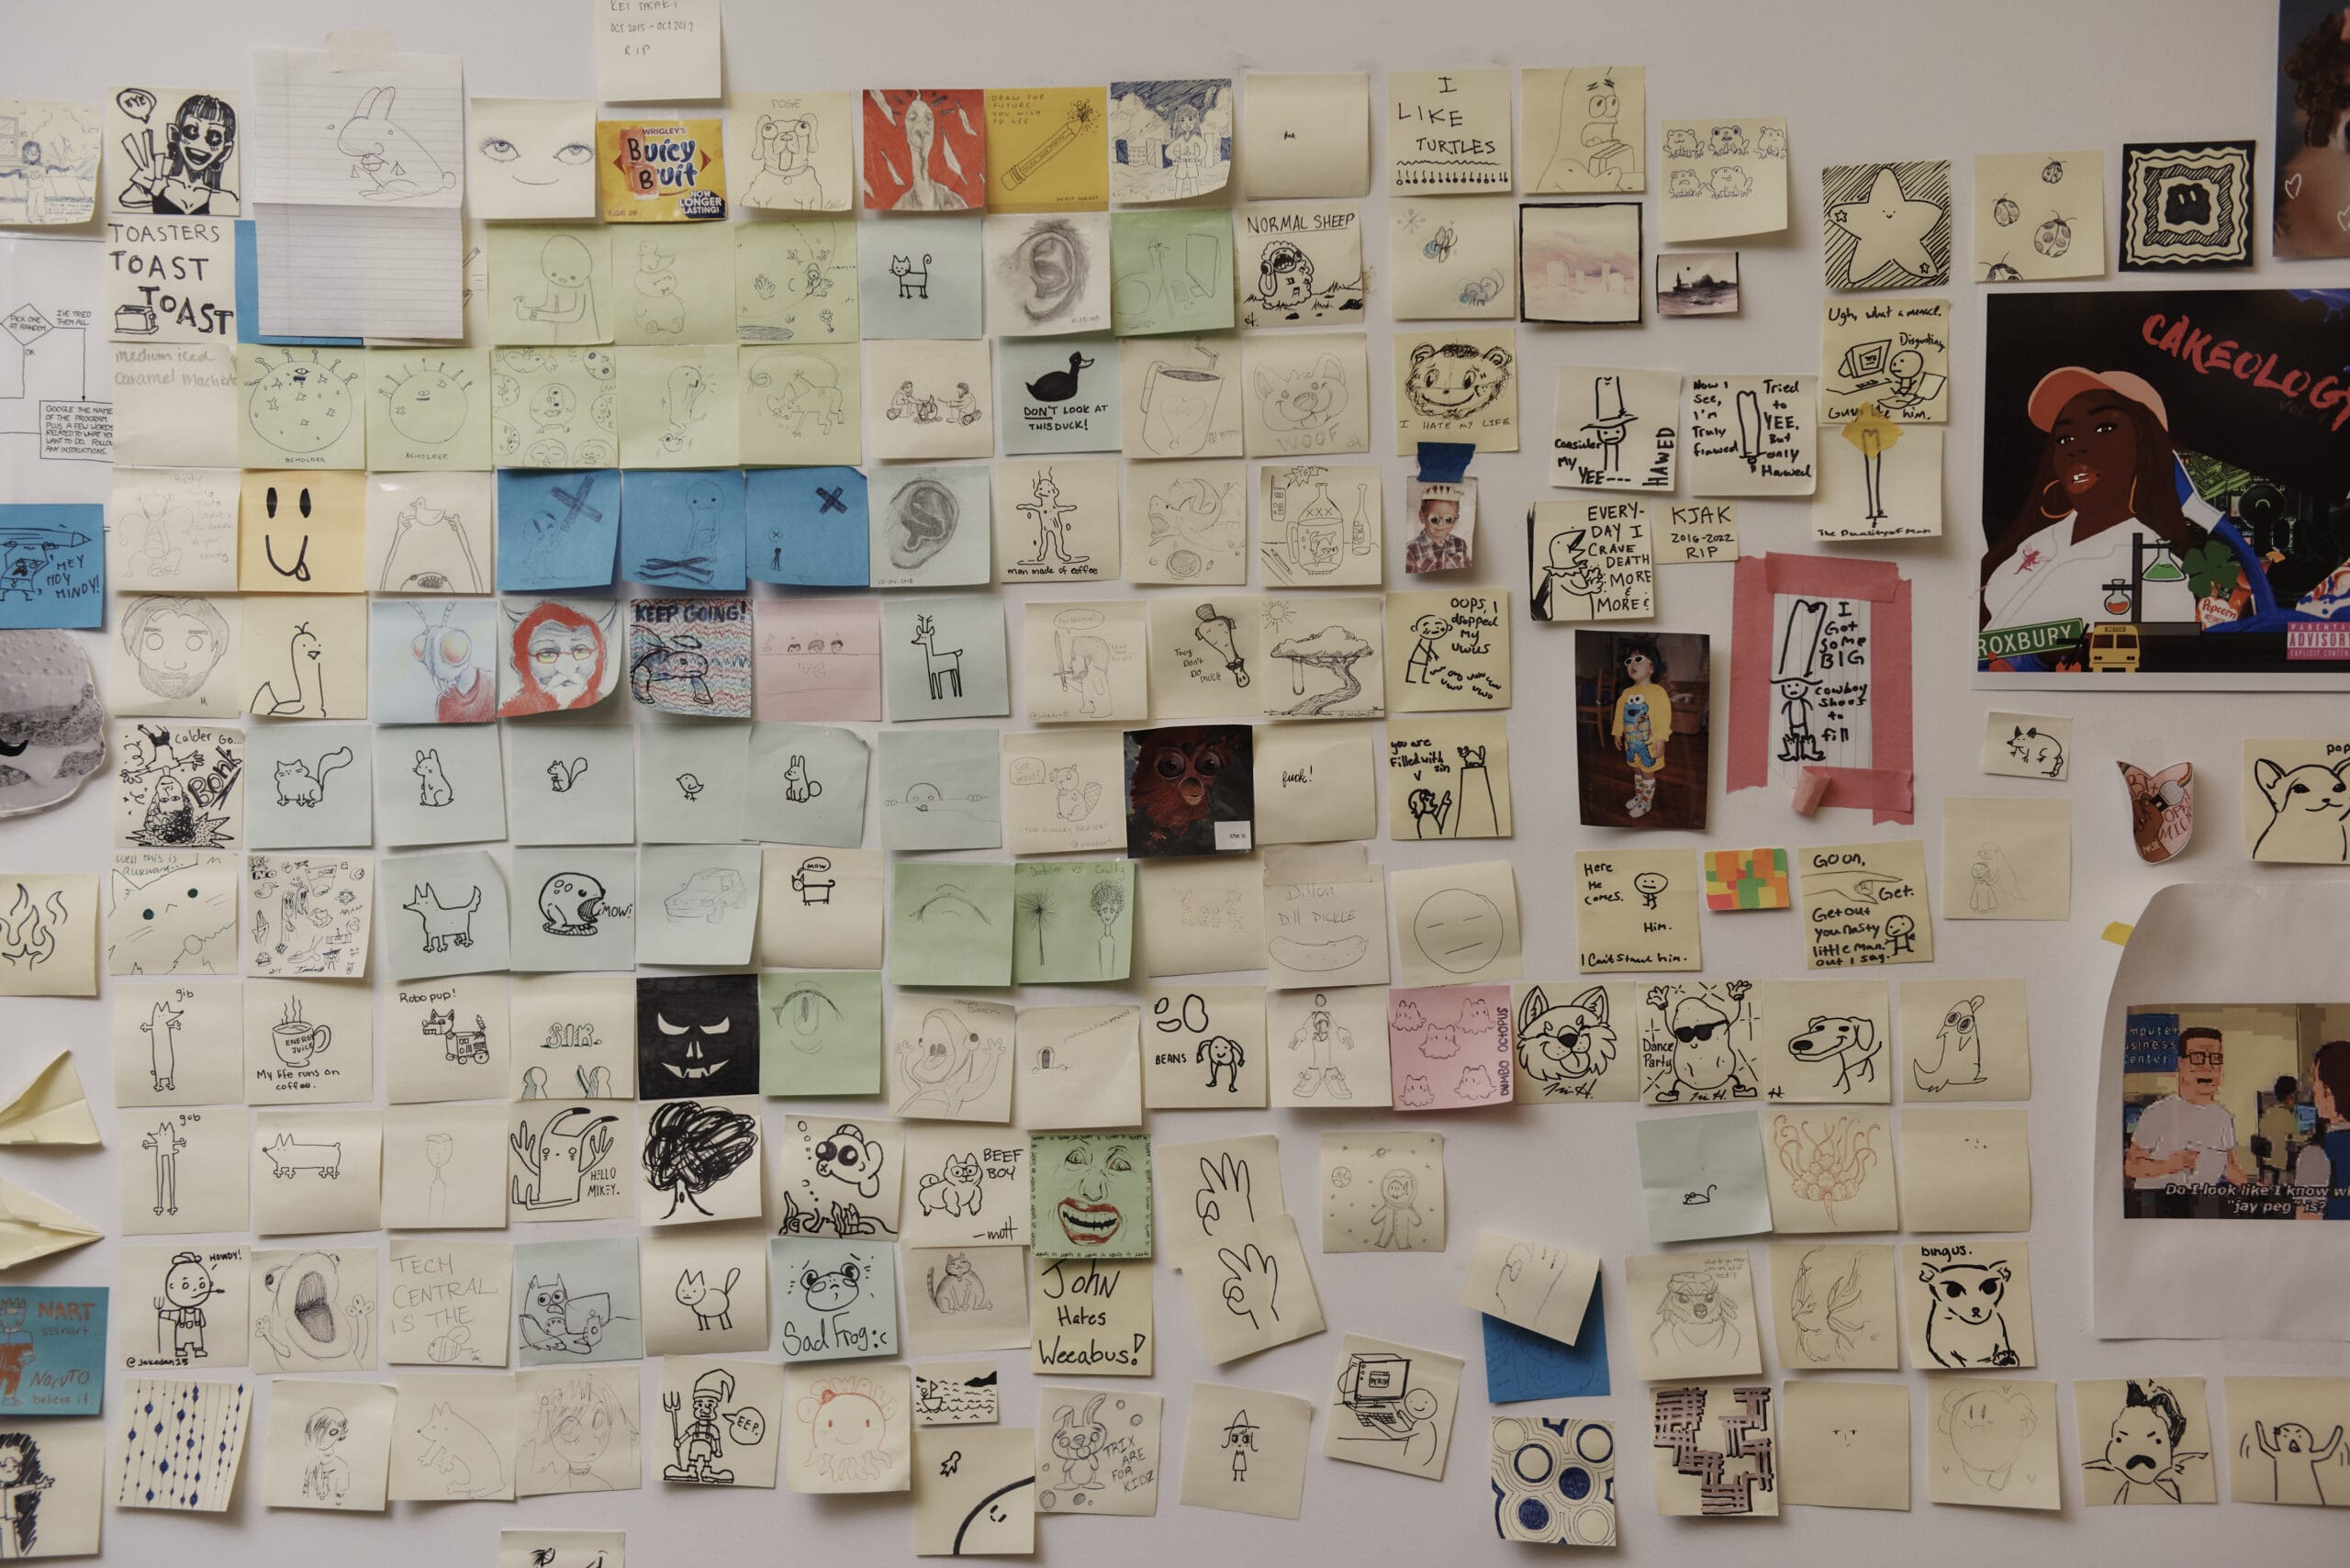 A wall covered in mult-colored post-it notes with drawings and writing on them.